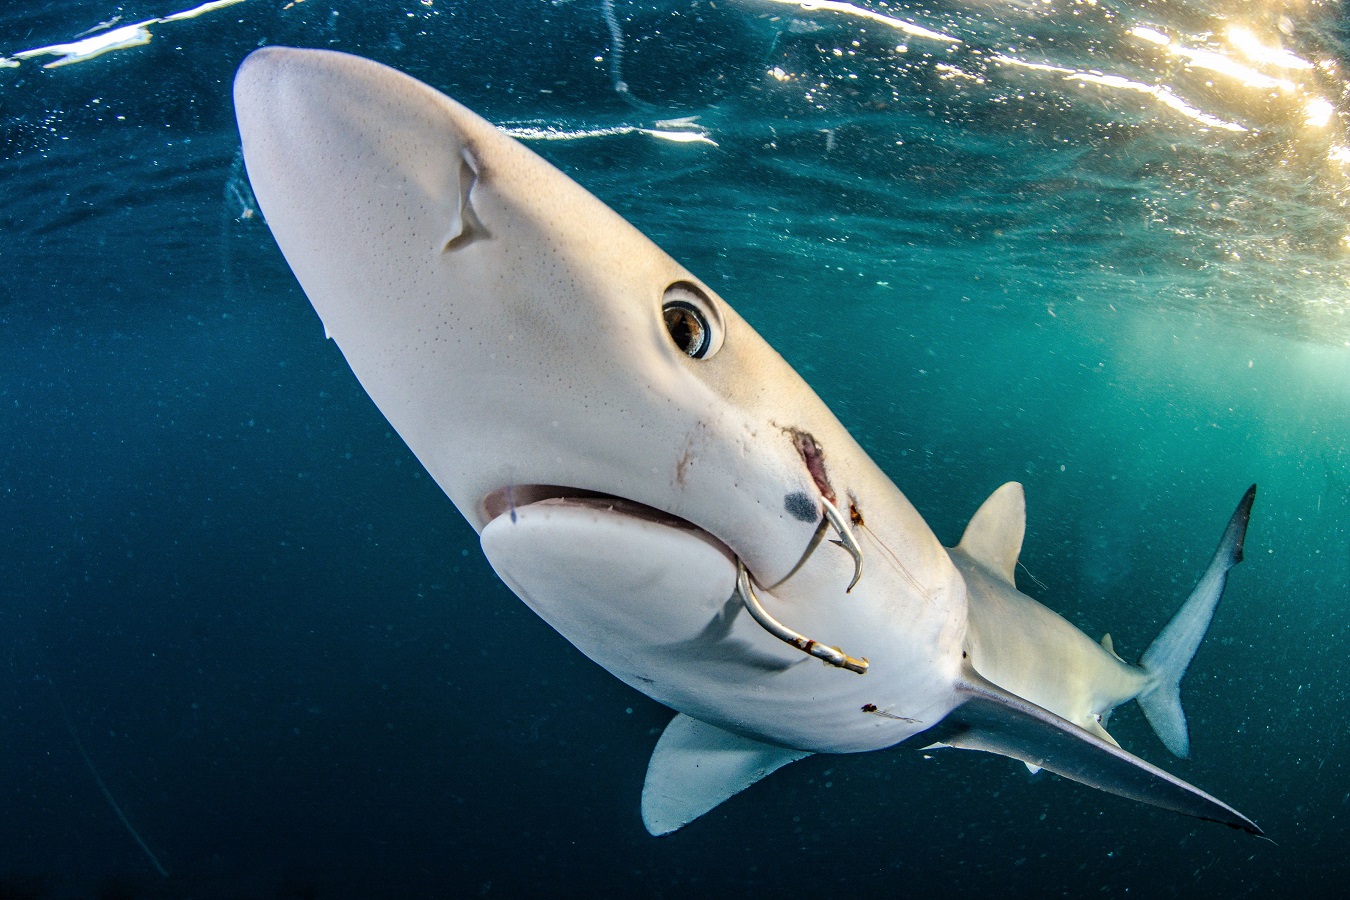 Blue shark in Sharks category by Jim Machinchick, US (Gold)